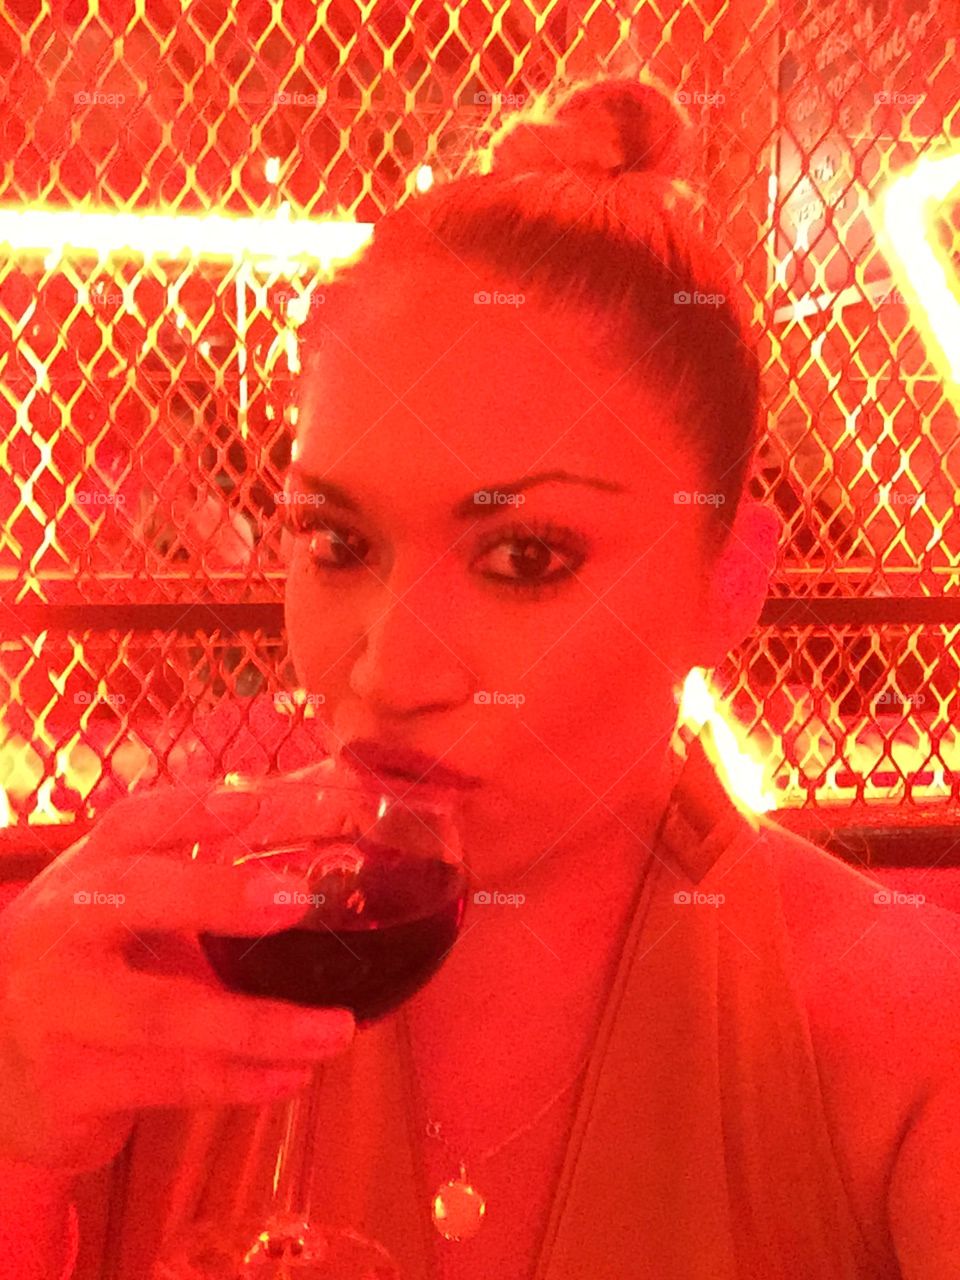 Red light district and wine 🍷🍷❤️- Paris, France